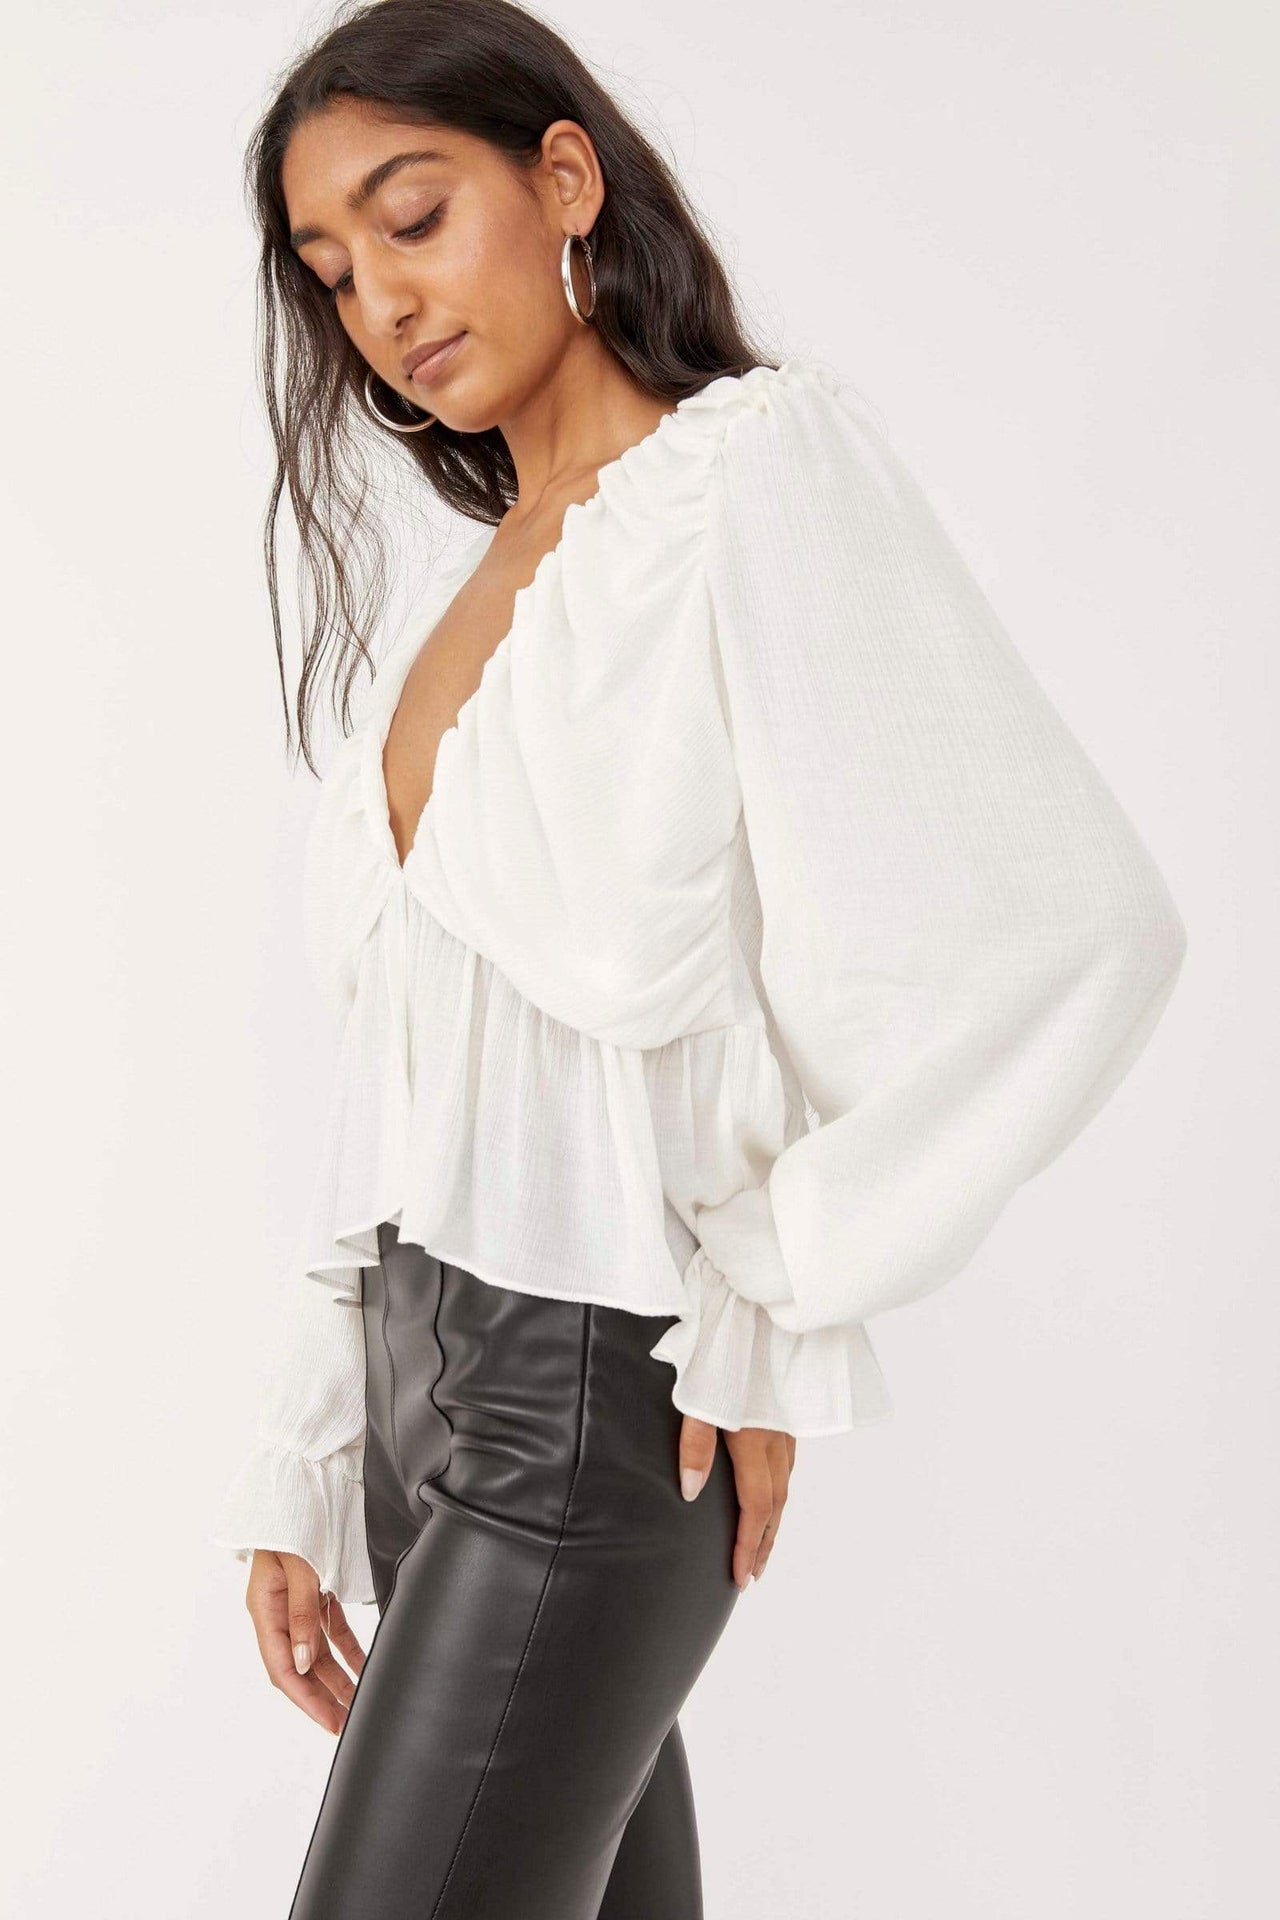 Daia Top Frenchnilla, Long Blouse by Free People | LIT Boutique